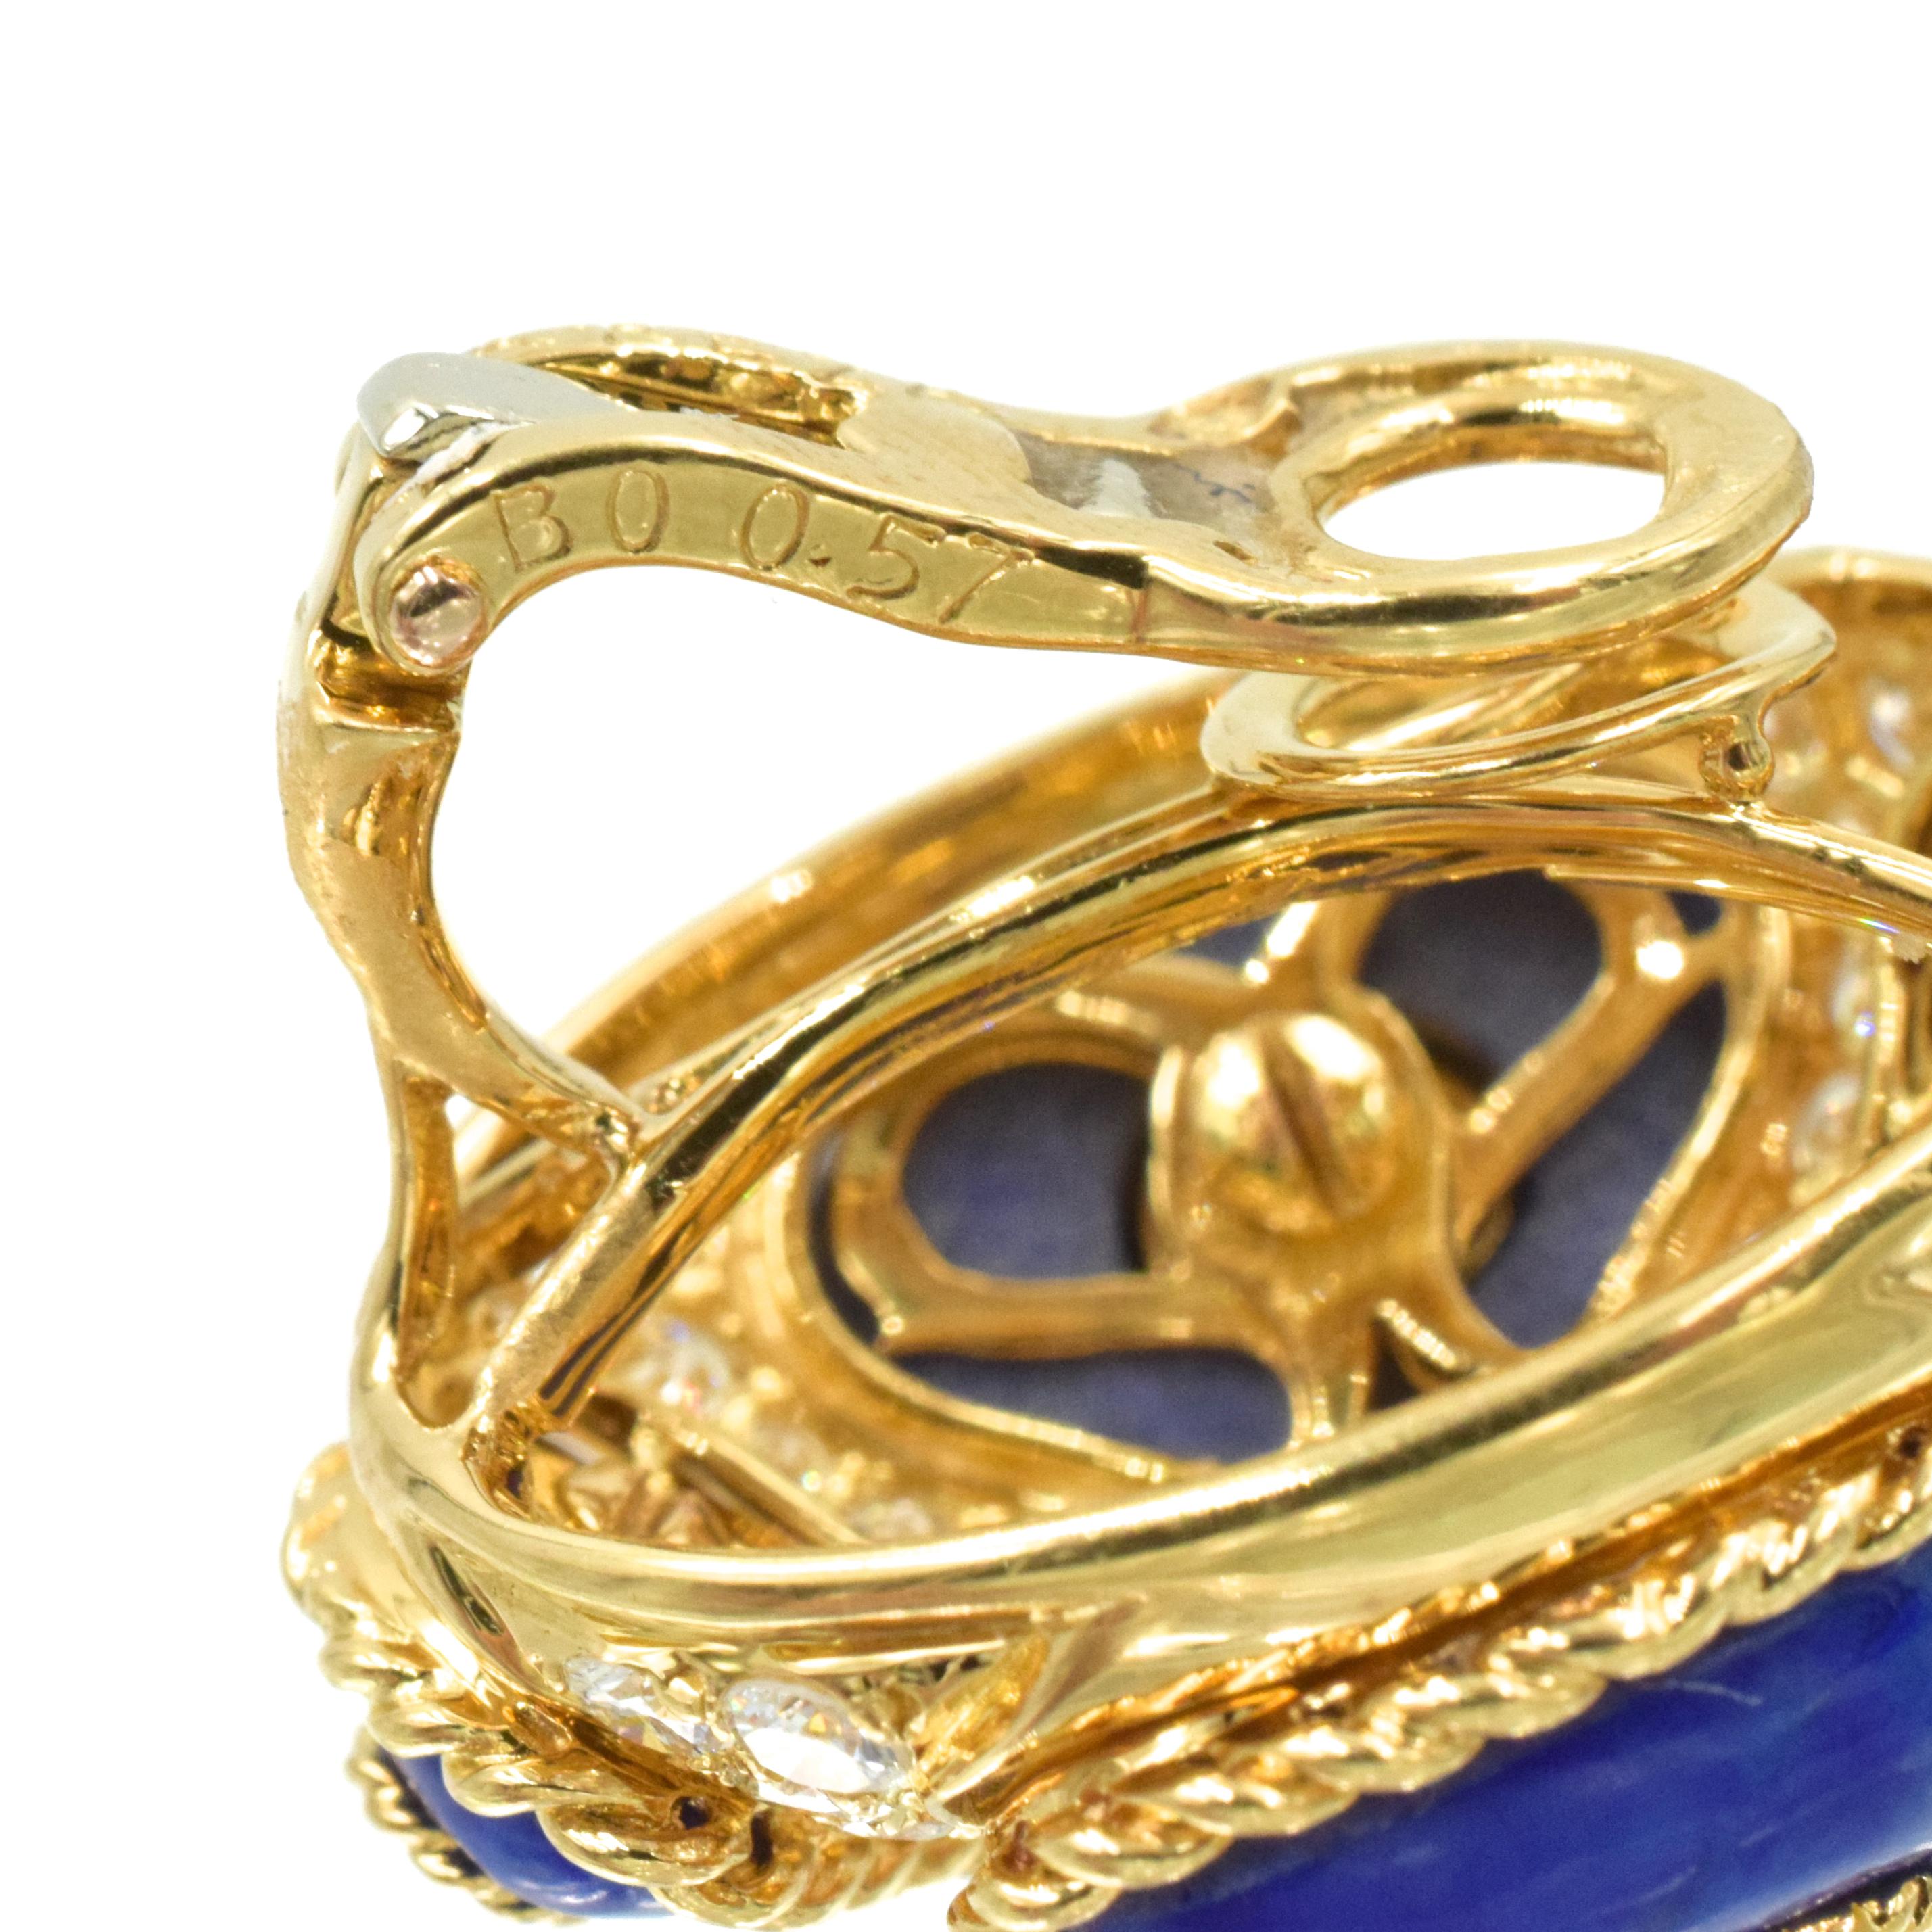 Alexandre Reza Lapis Lazuli and Diamond Ring in 18k Yellow Gold For Sale 1